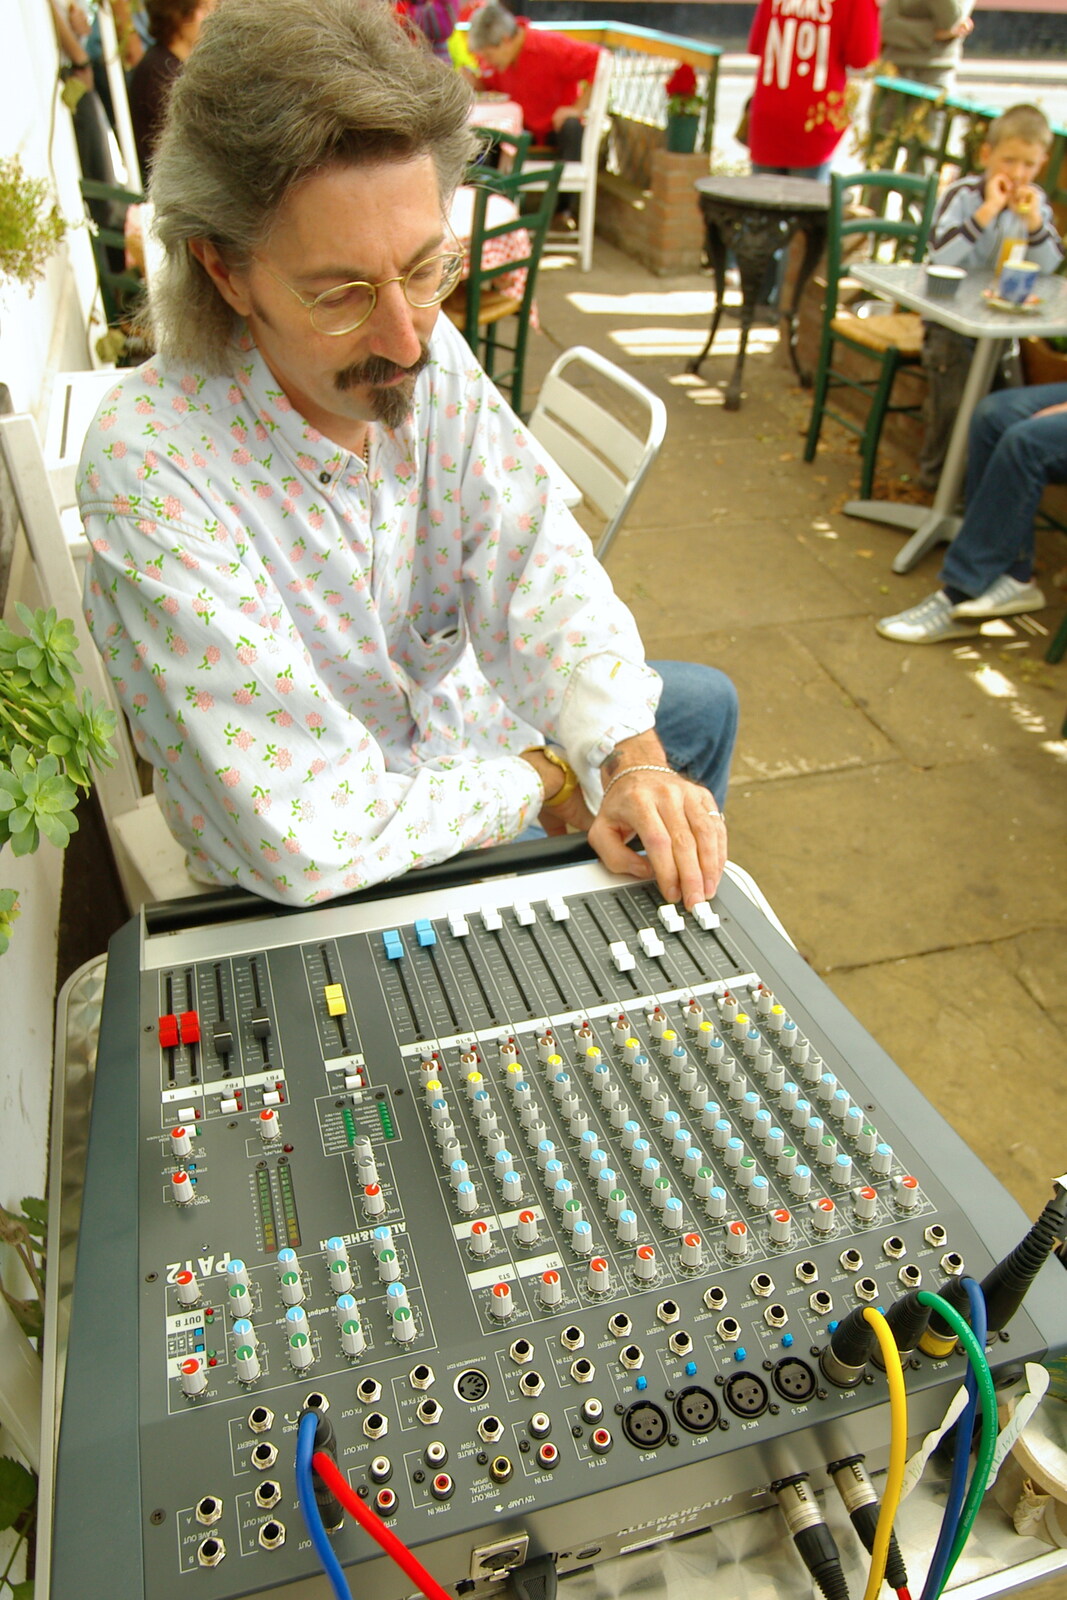 Rob twiddles knobs on the new desk from Sam and Daisy at the Angel Café, Diss, Norfolk - 17th September 2005